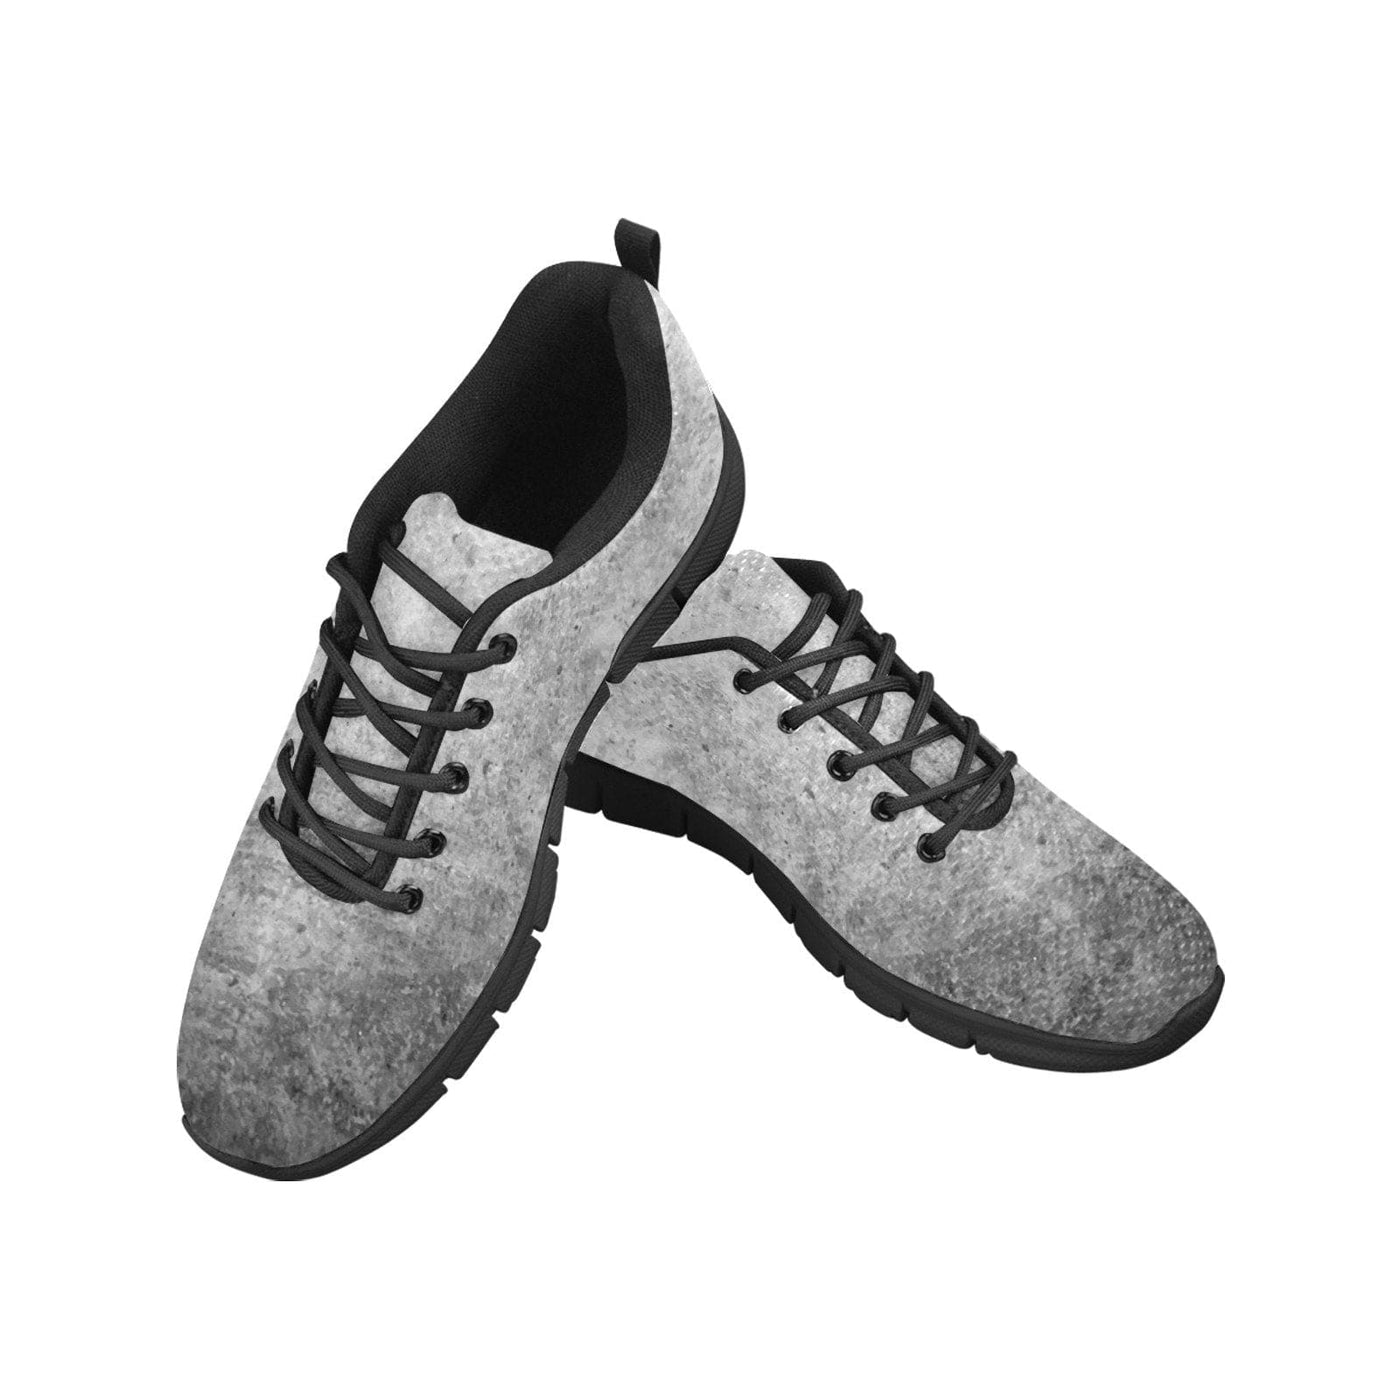 Sneakers For Men Grey And Black - Canvas Mesh Athletic Running Shoes - Mens